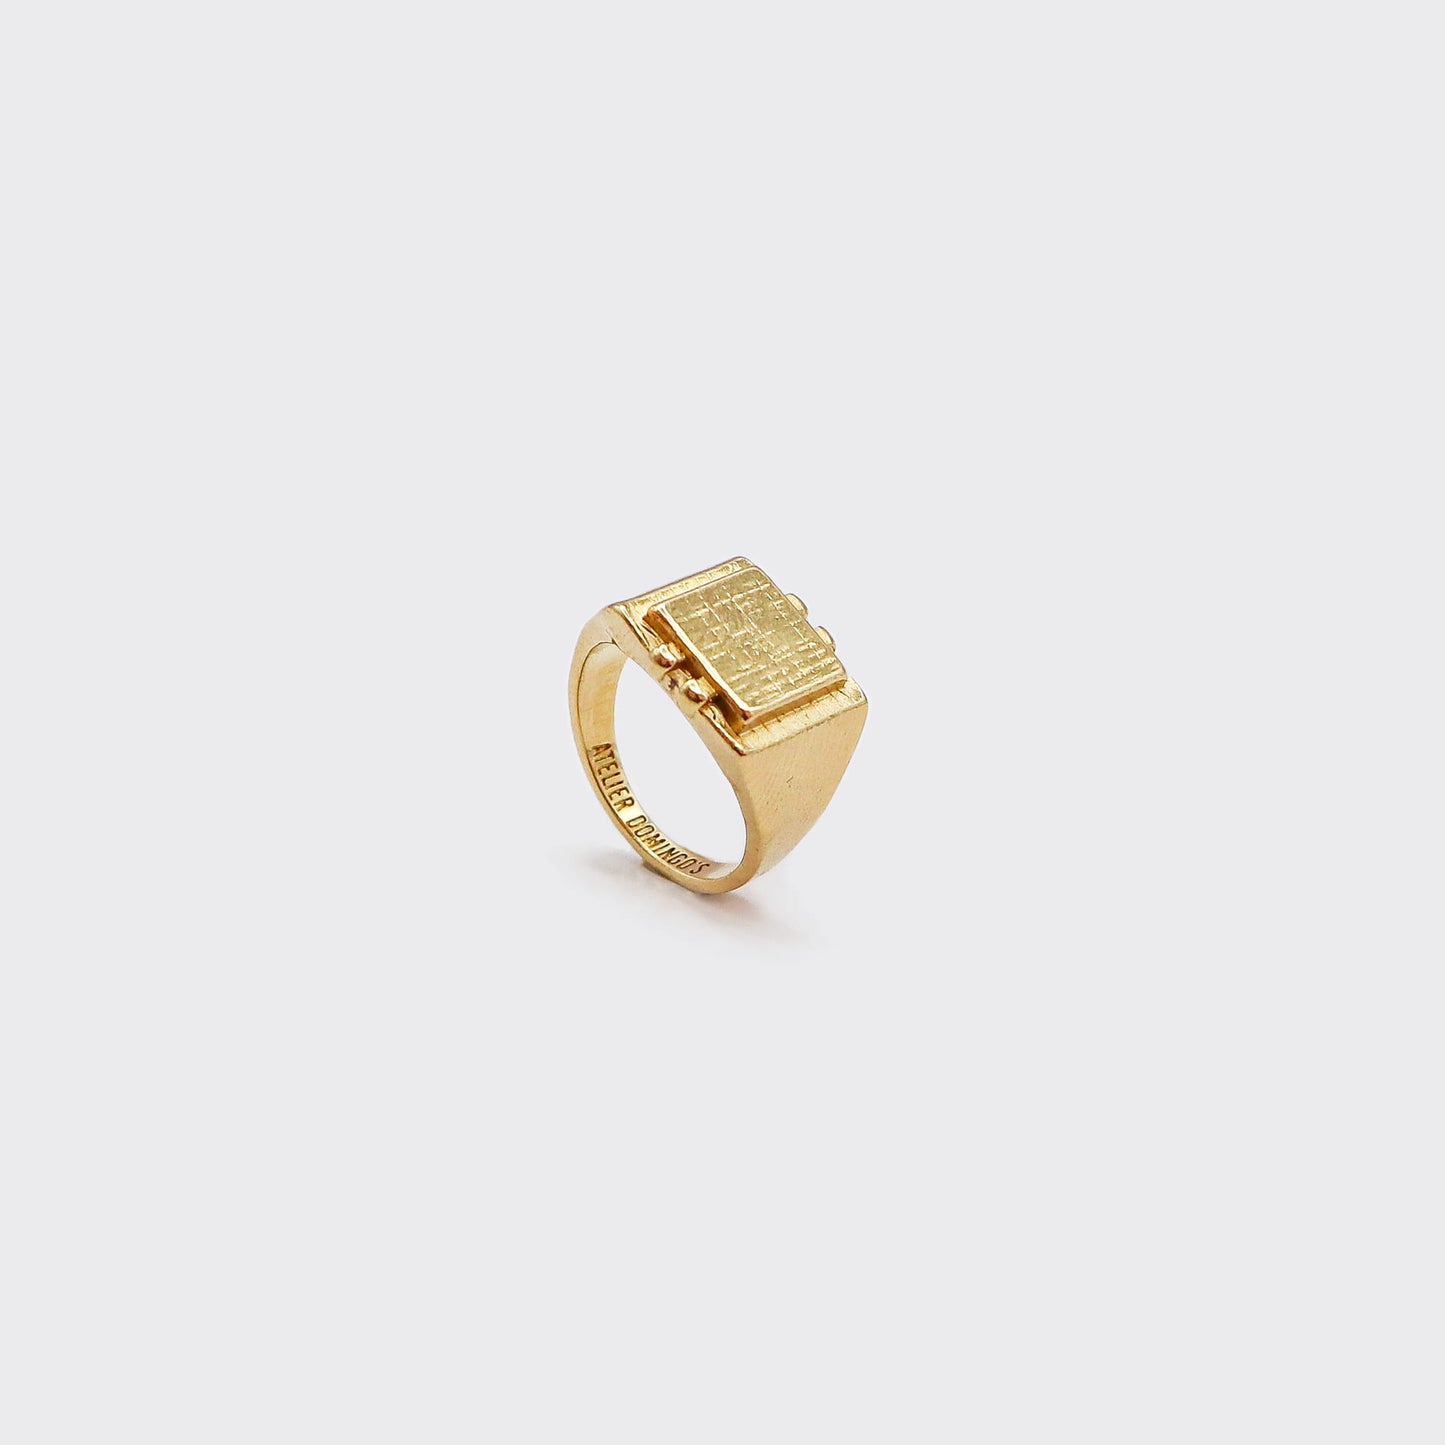 Atelier Domingo's Square ring is a promise of timeless elegance. This ring has been designed in France and is made in Spain, for both men and women. Handcrafted for a vintage finishing, this jewelry is made of a high-quality 24 karat gold plating.